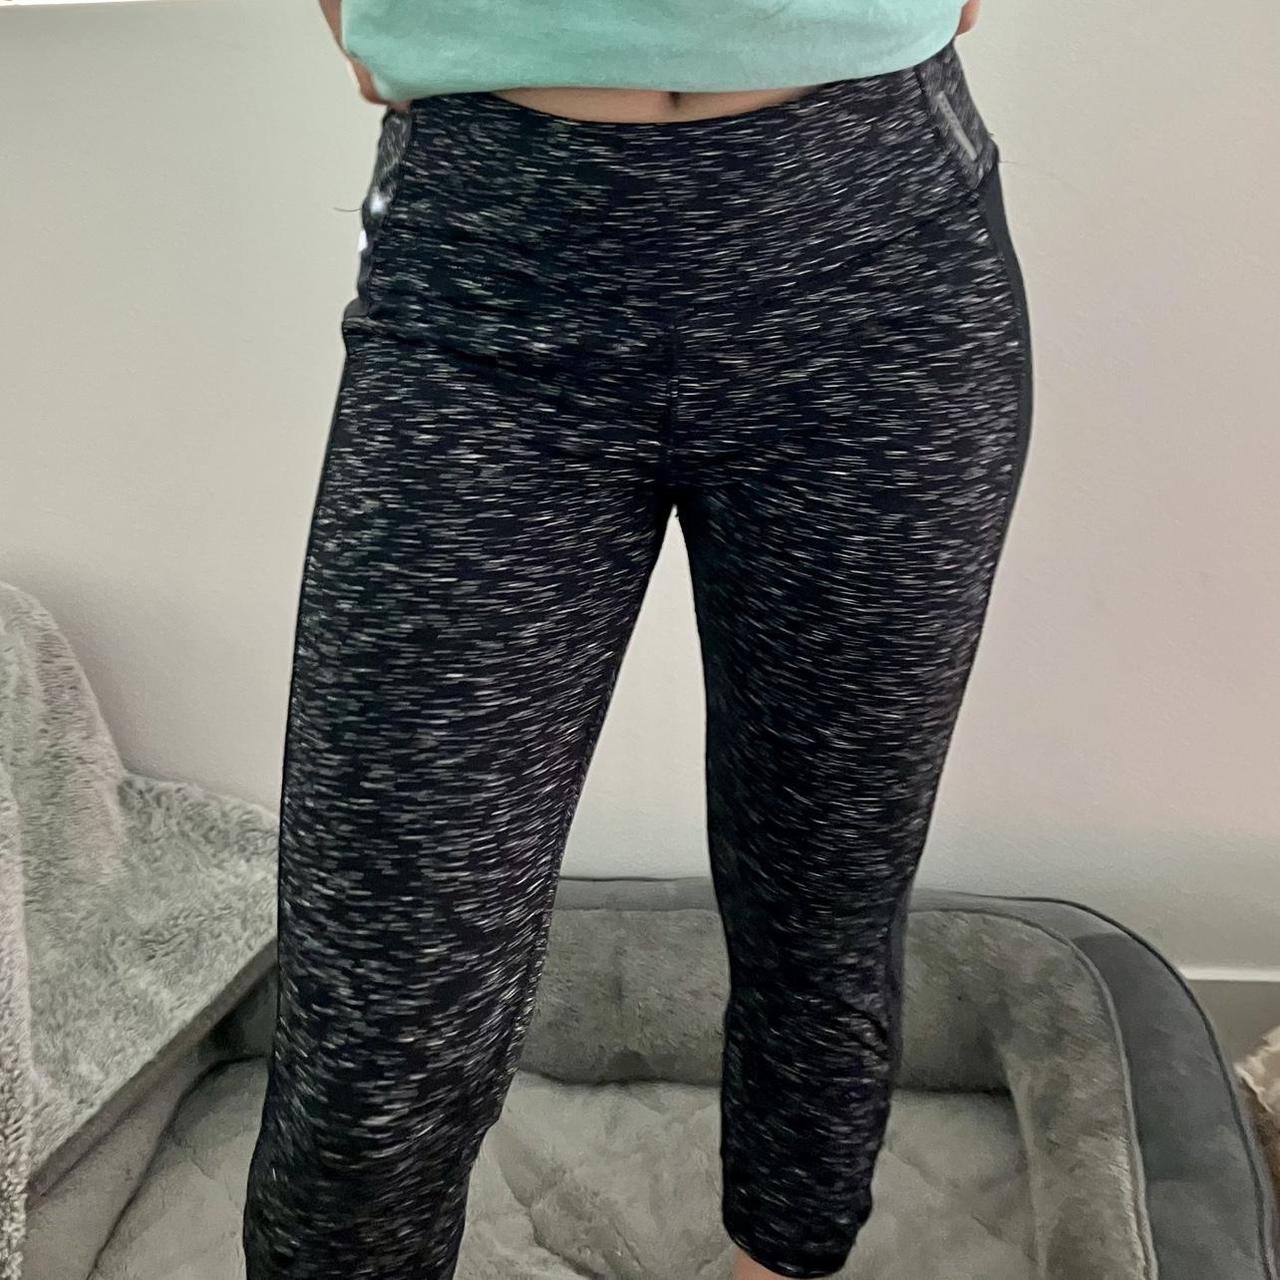 Women’s RBX leggings size Large. , Model is 5’3” and